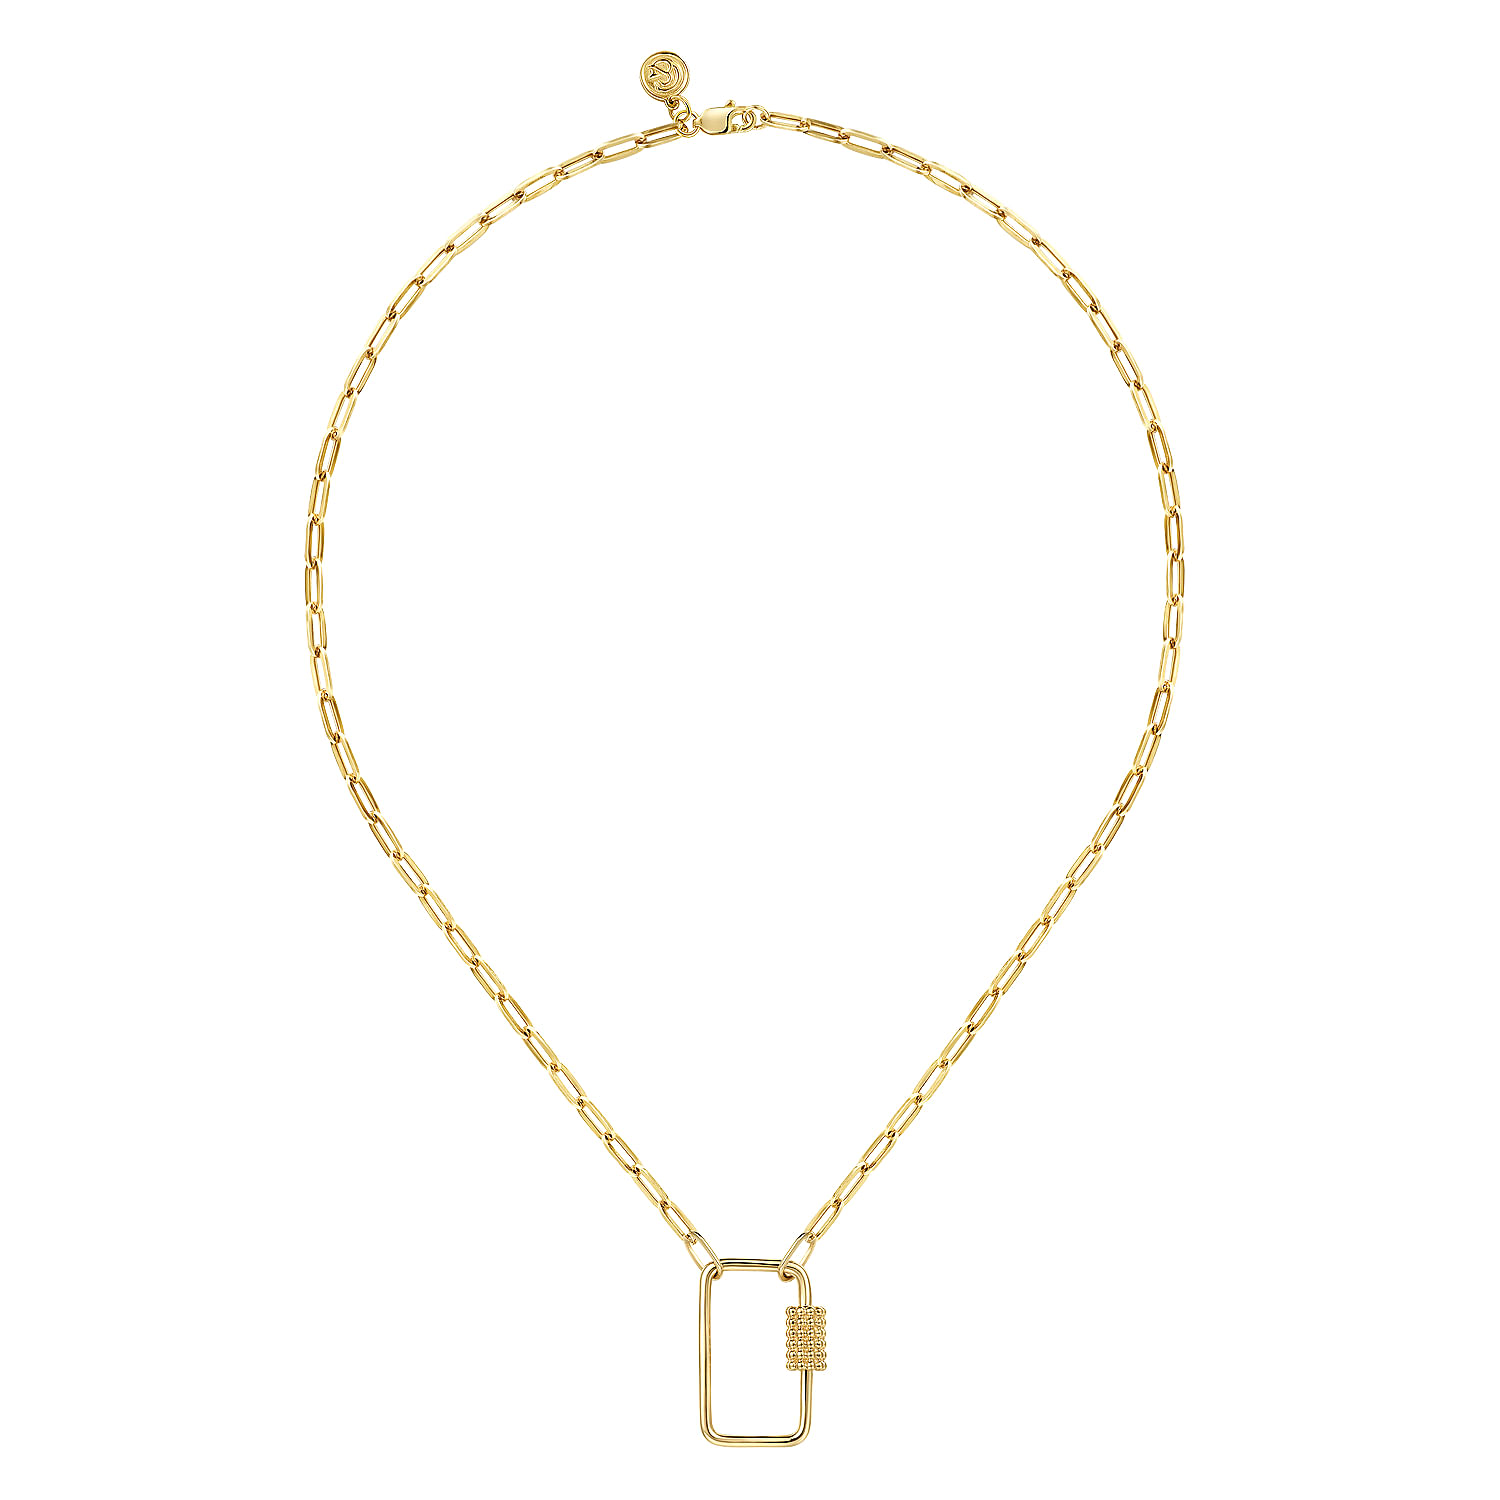 14K Yellow Gold Bujukan Carabiner  Lock Necklace with Hollow Paperclip Chain